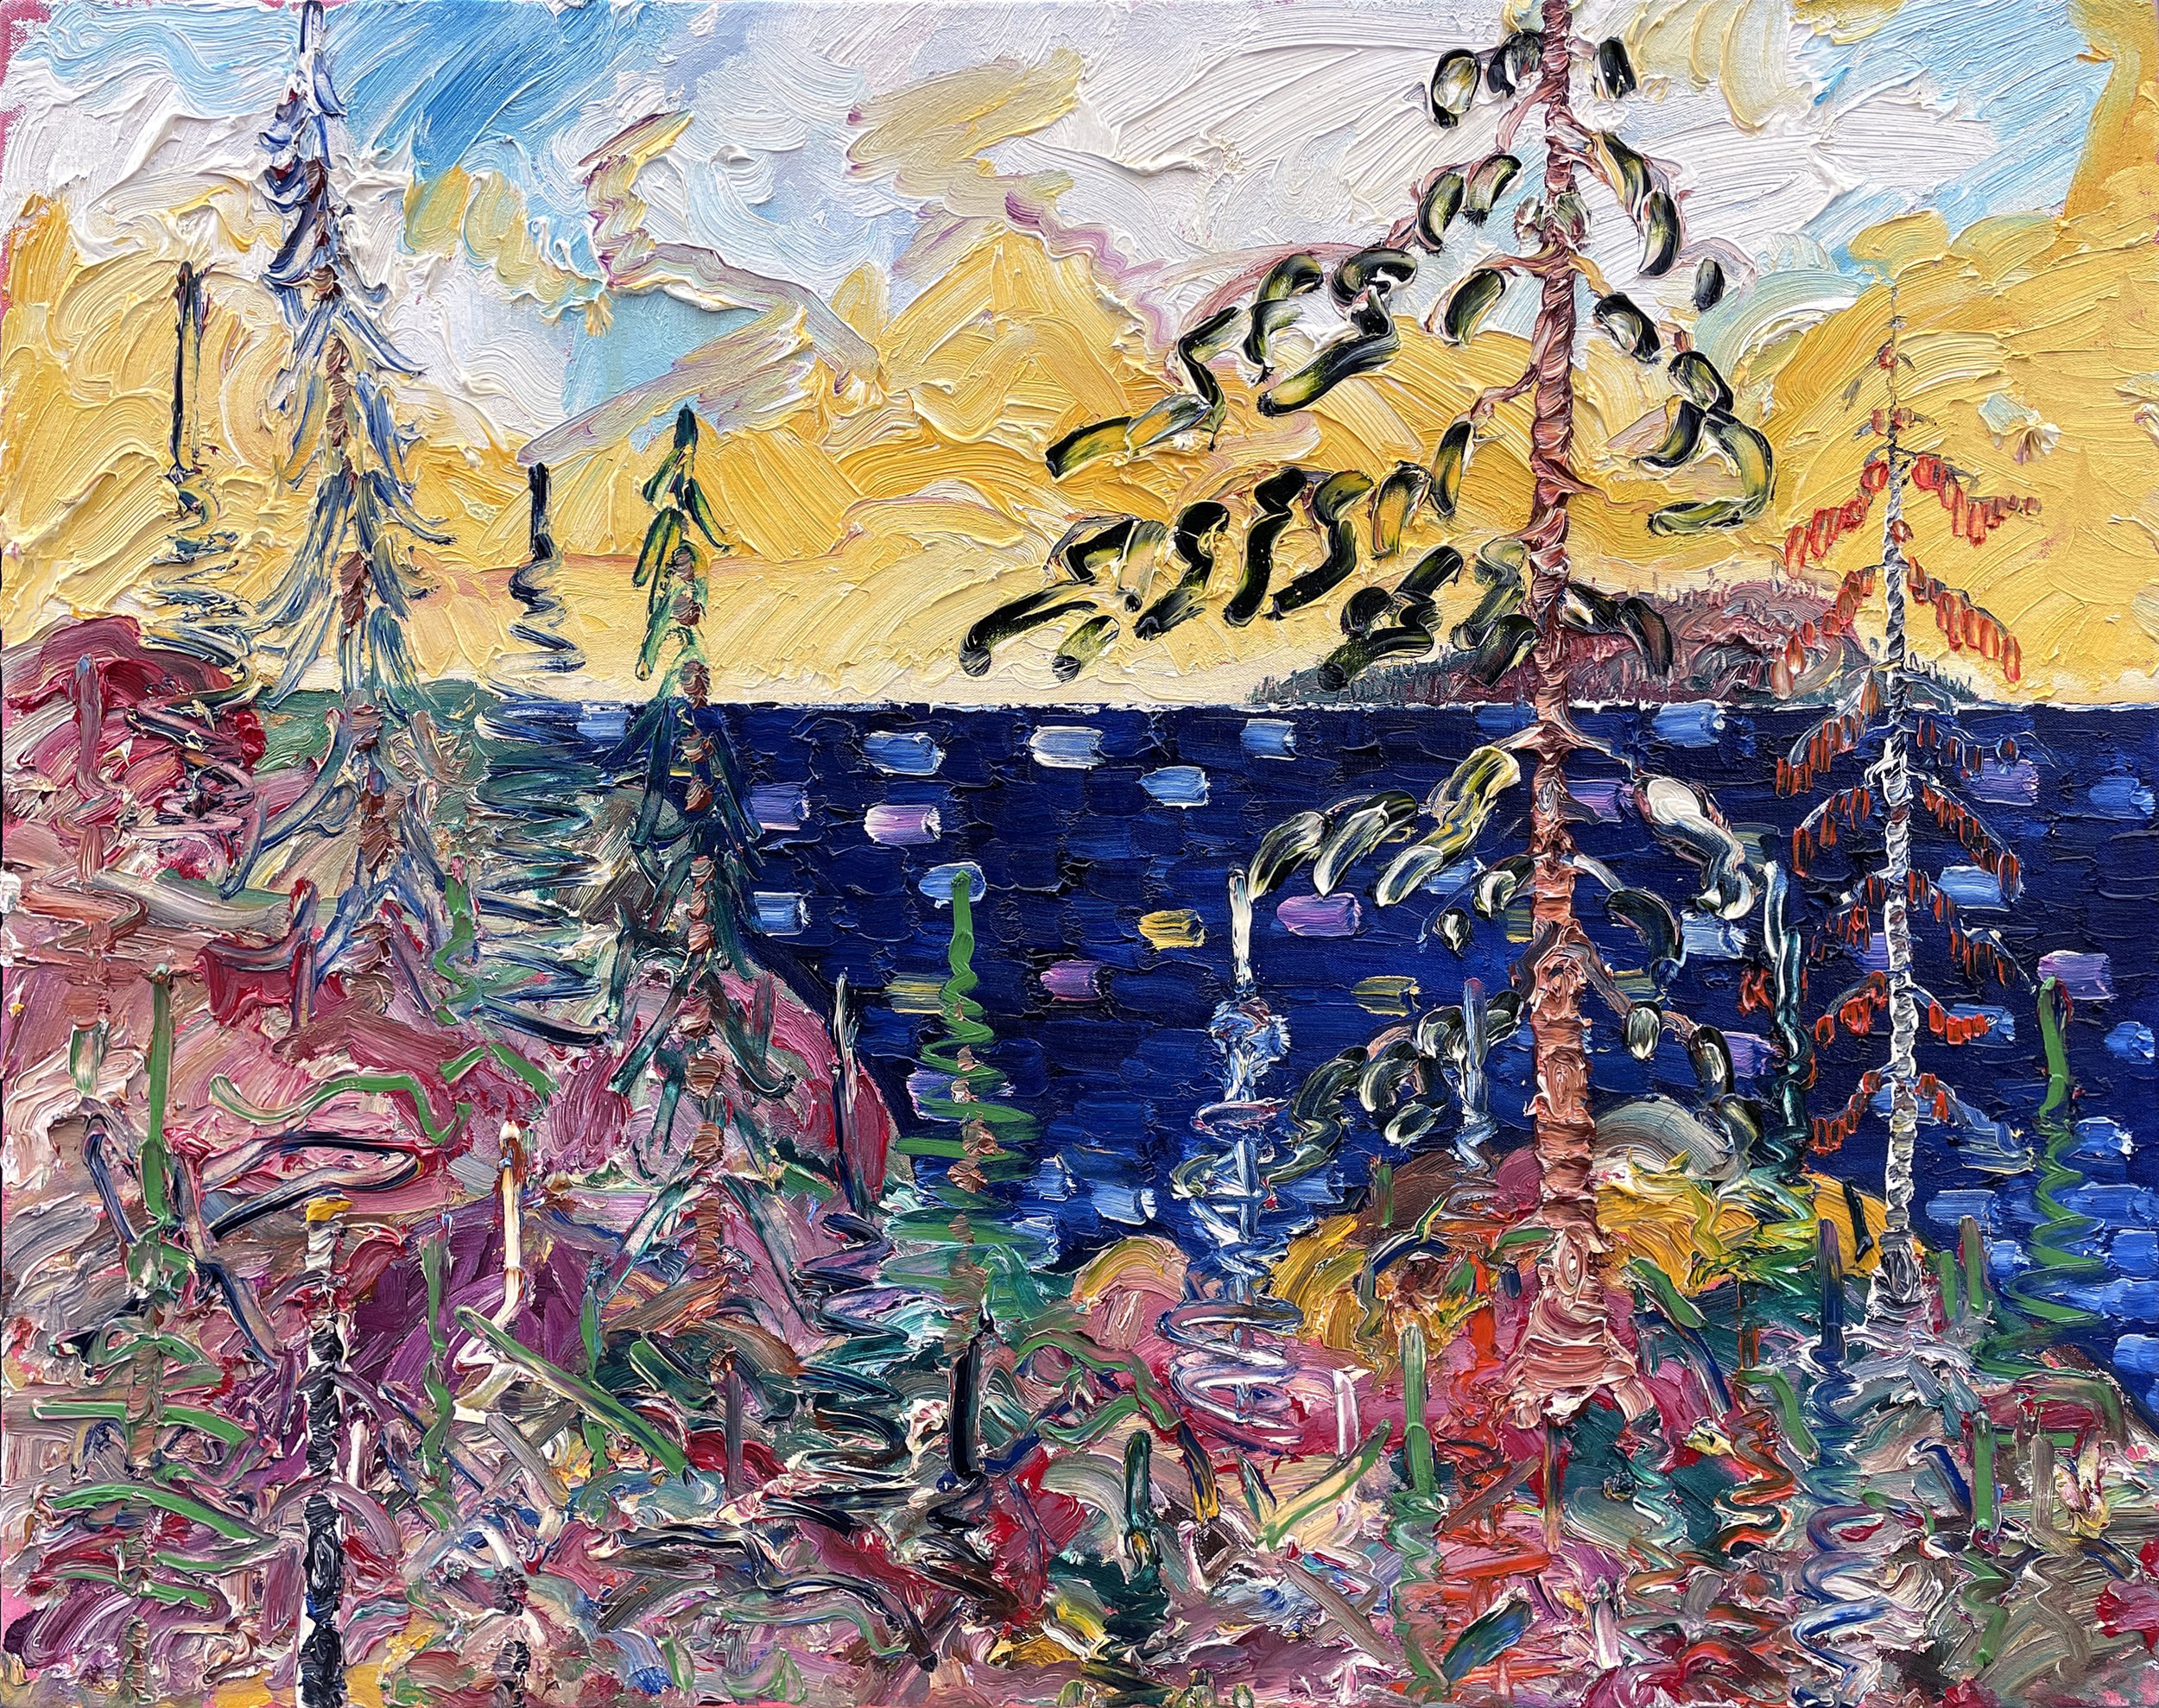 Red Pine Shore, 2009, 30 x 38 in, oil on canvas (Sold)